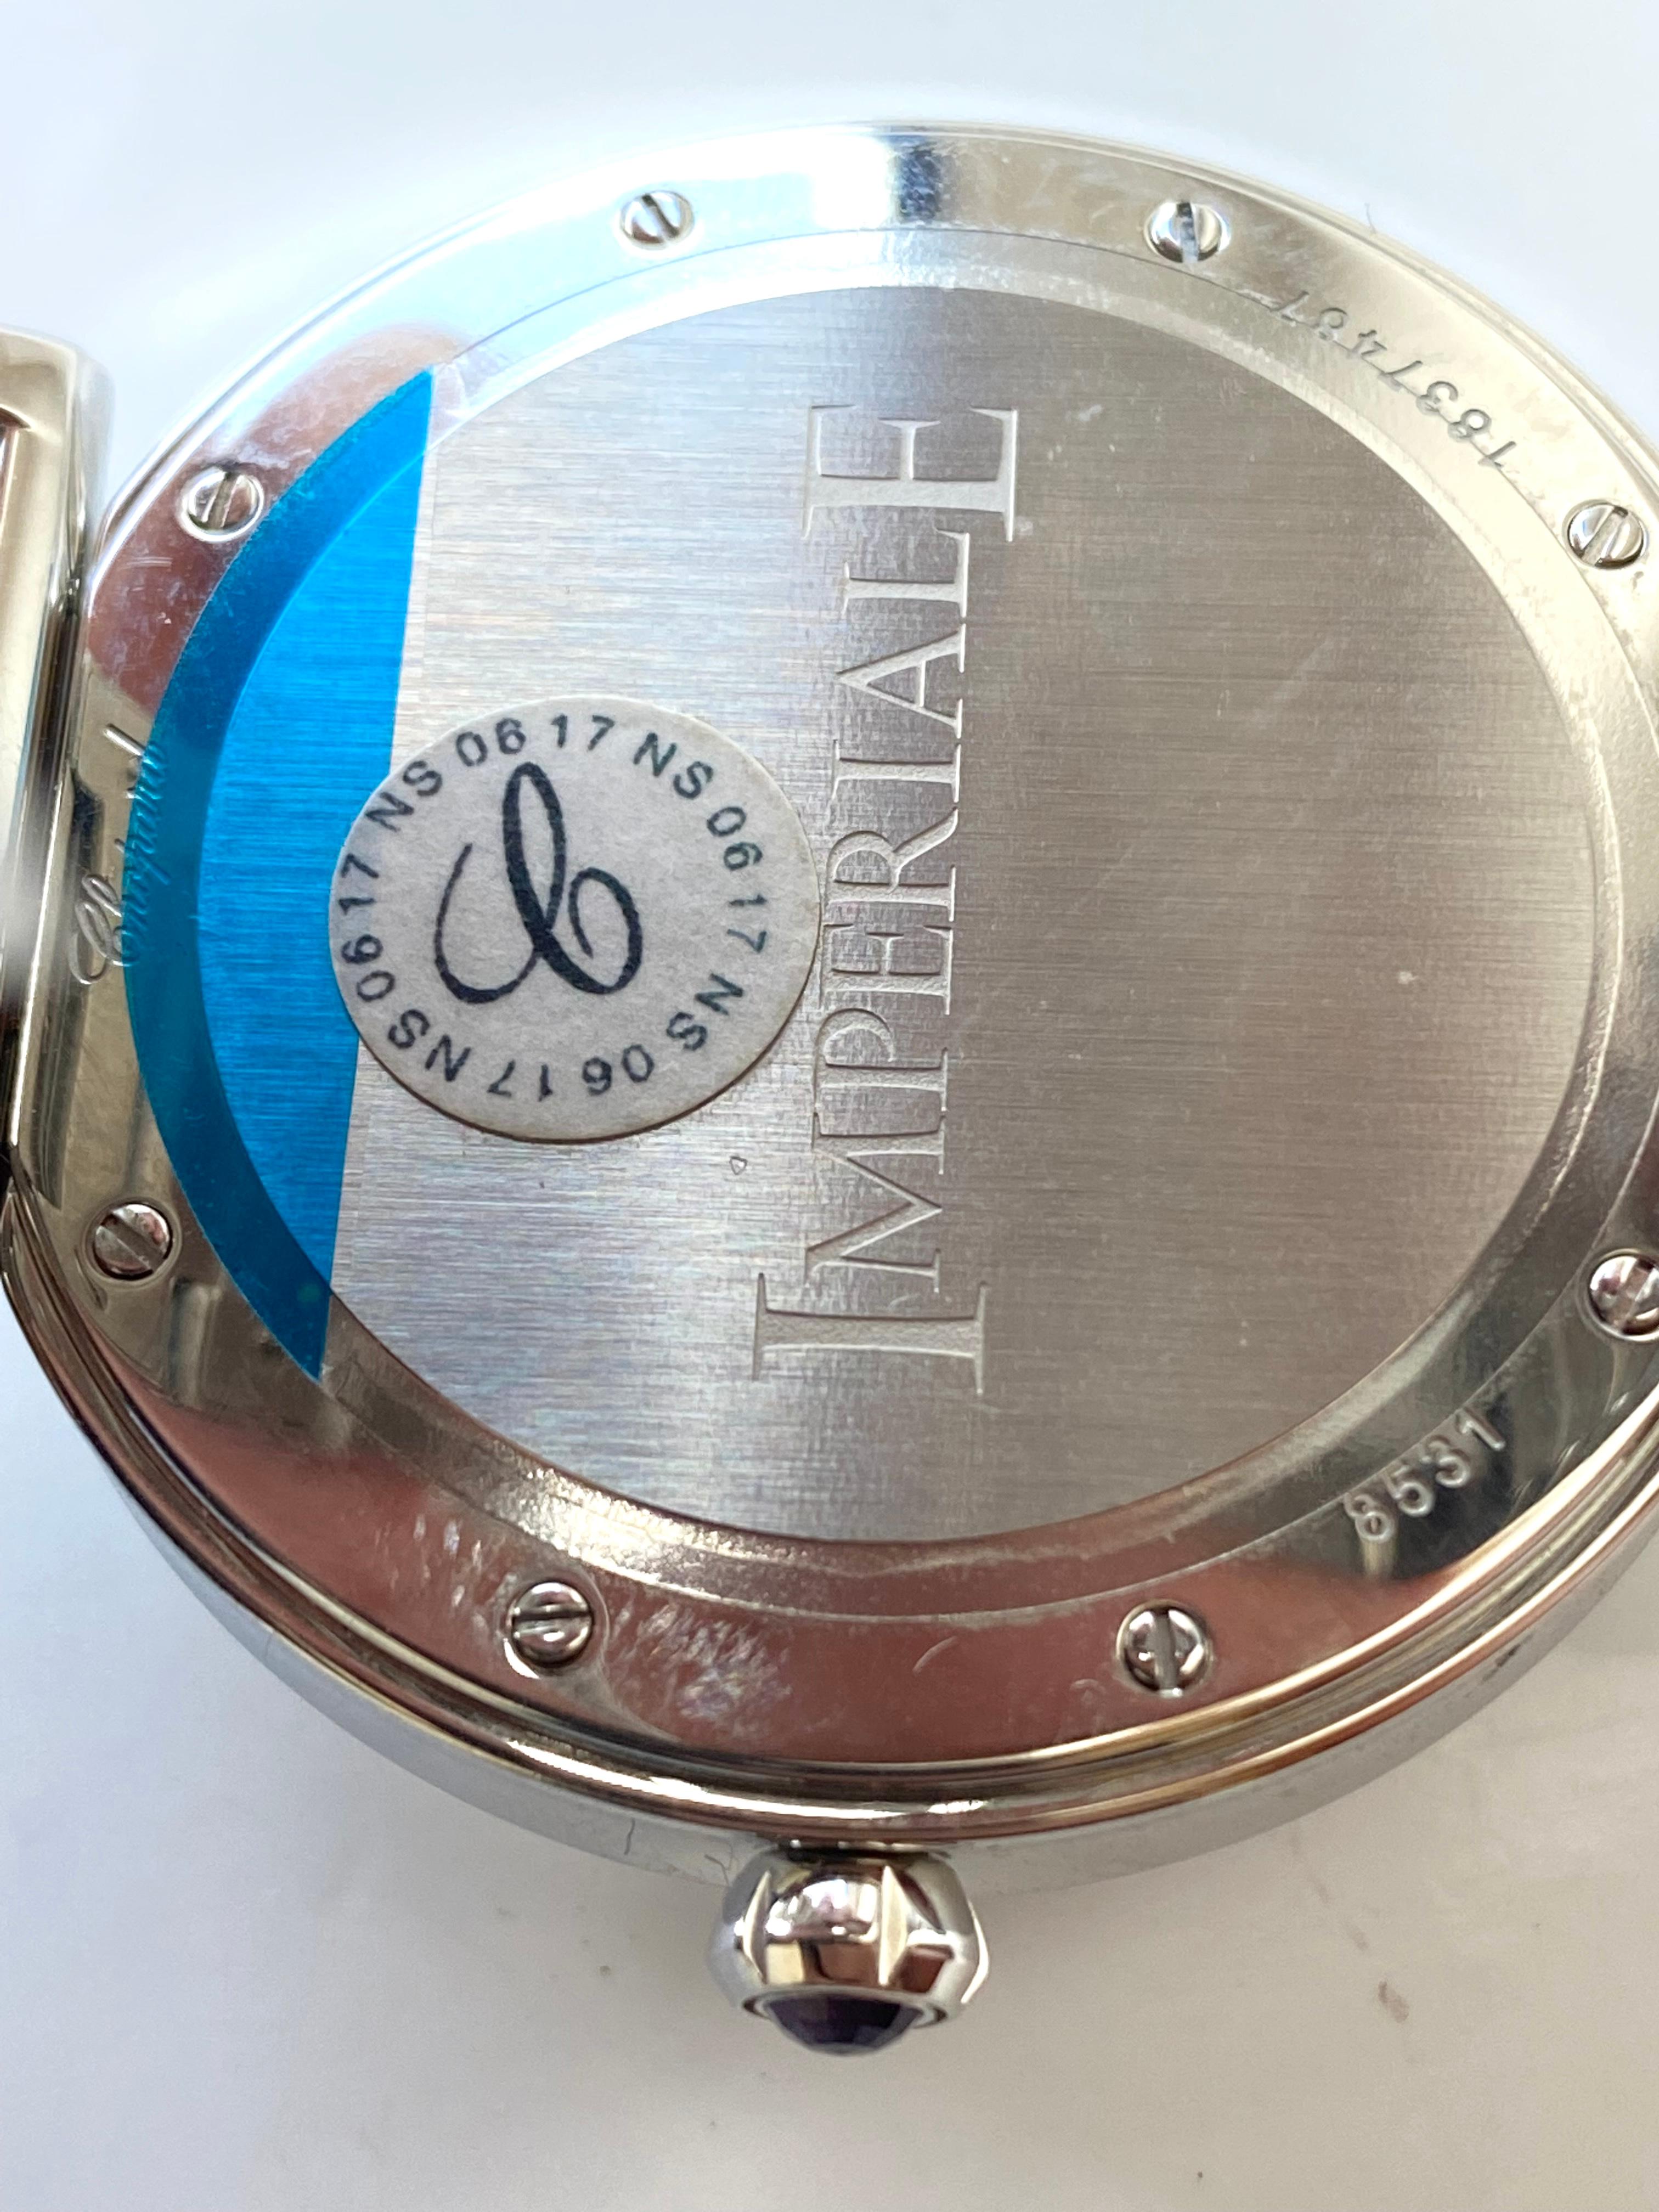 Chopard Imperiale Men's Stainless Steel with Box and Papers In Excellent Condition For Sale In Miami, FL